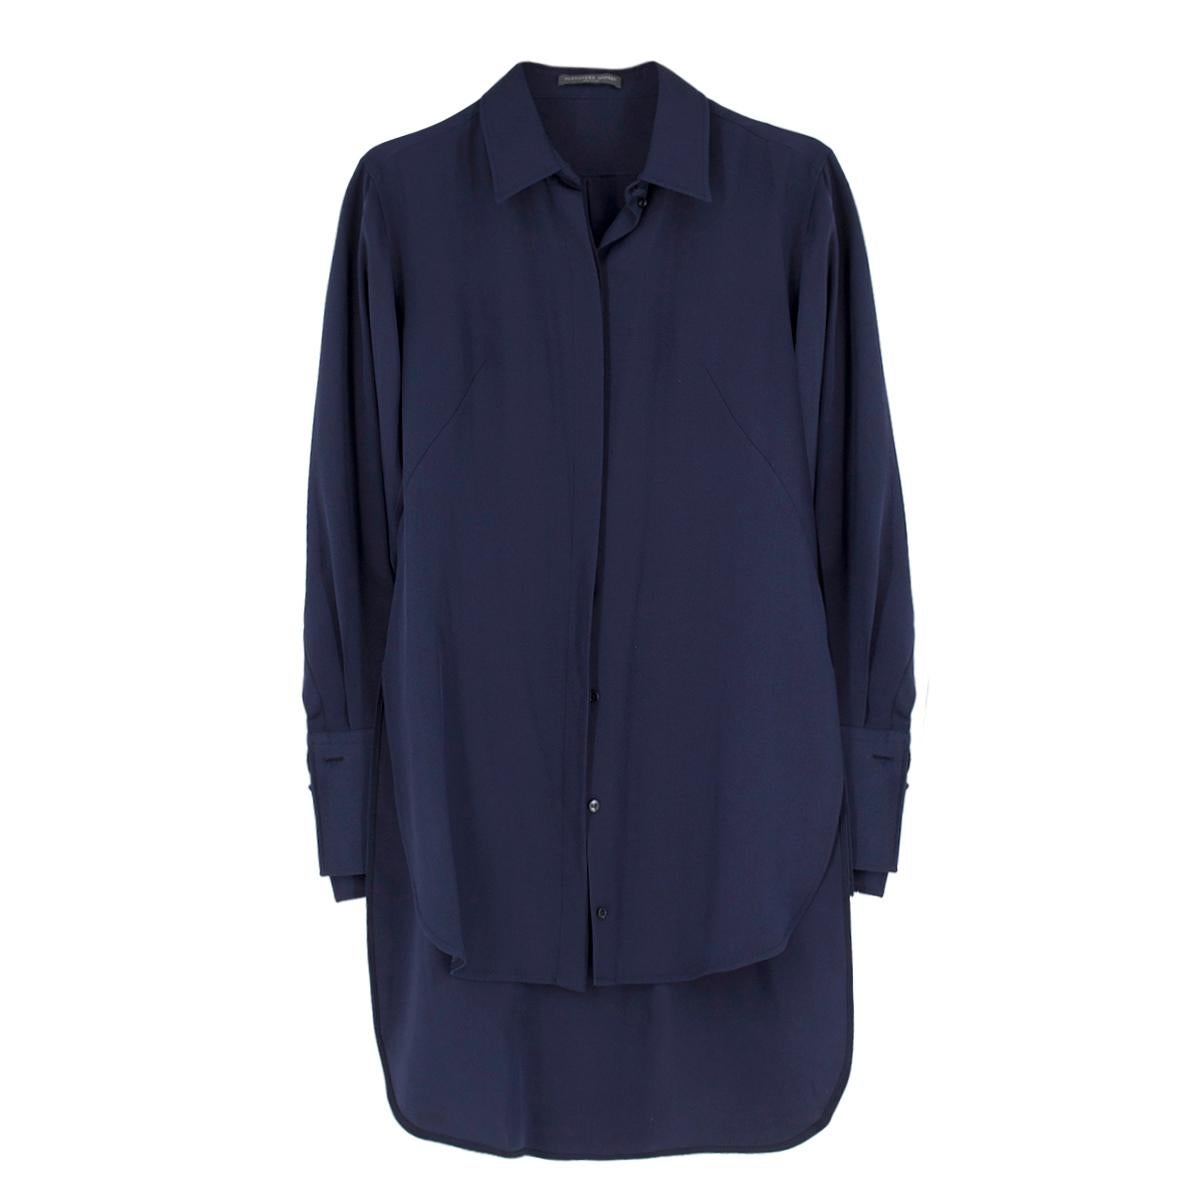 Alexander Mcqueen Navy Silk Shirt

- Navy silk shirt
- Lightweight
- Pointed collar
- Centre-front concealed button fastening
- Ruched buttoned cuffs
- Step back hem
- Straight loose fit
- 100% silk

Please note, these items are pre-owned and may